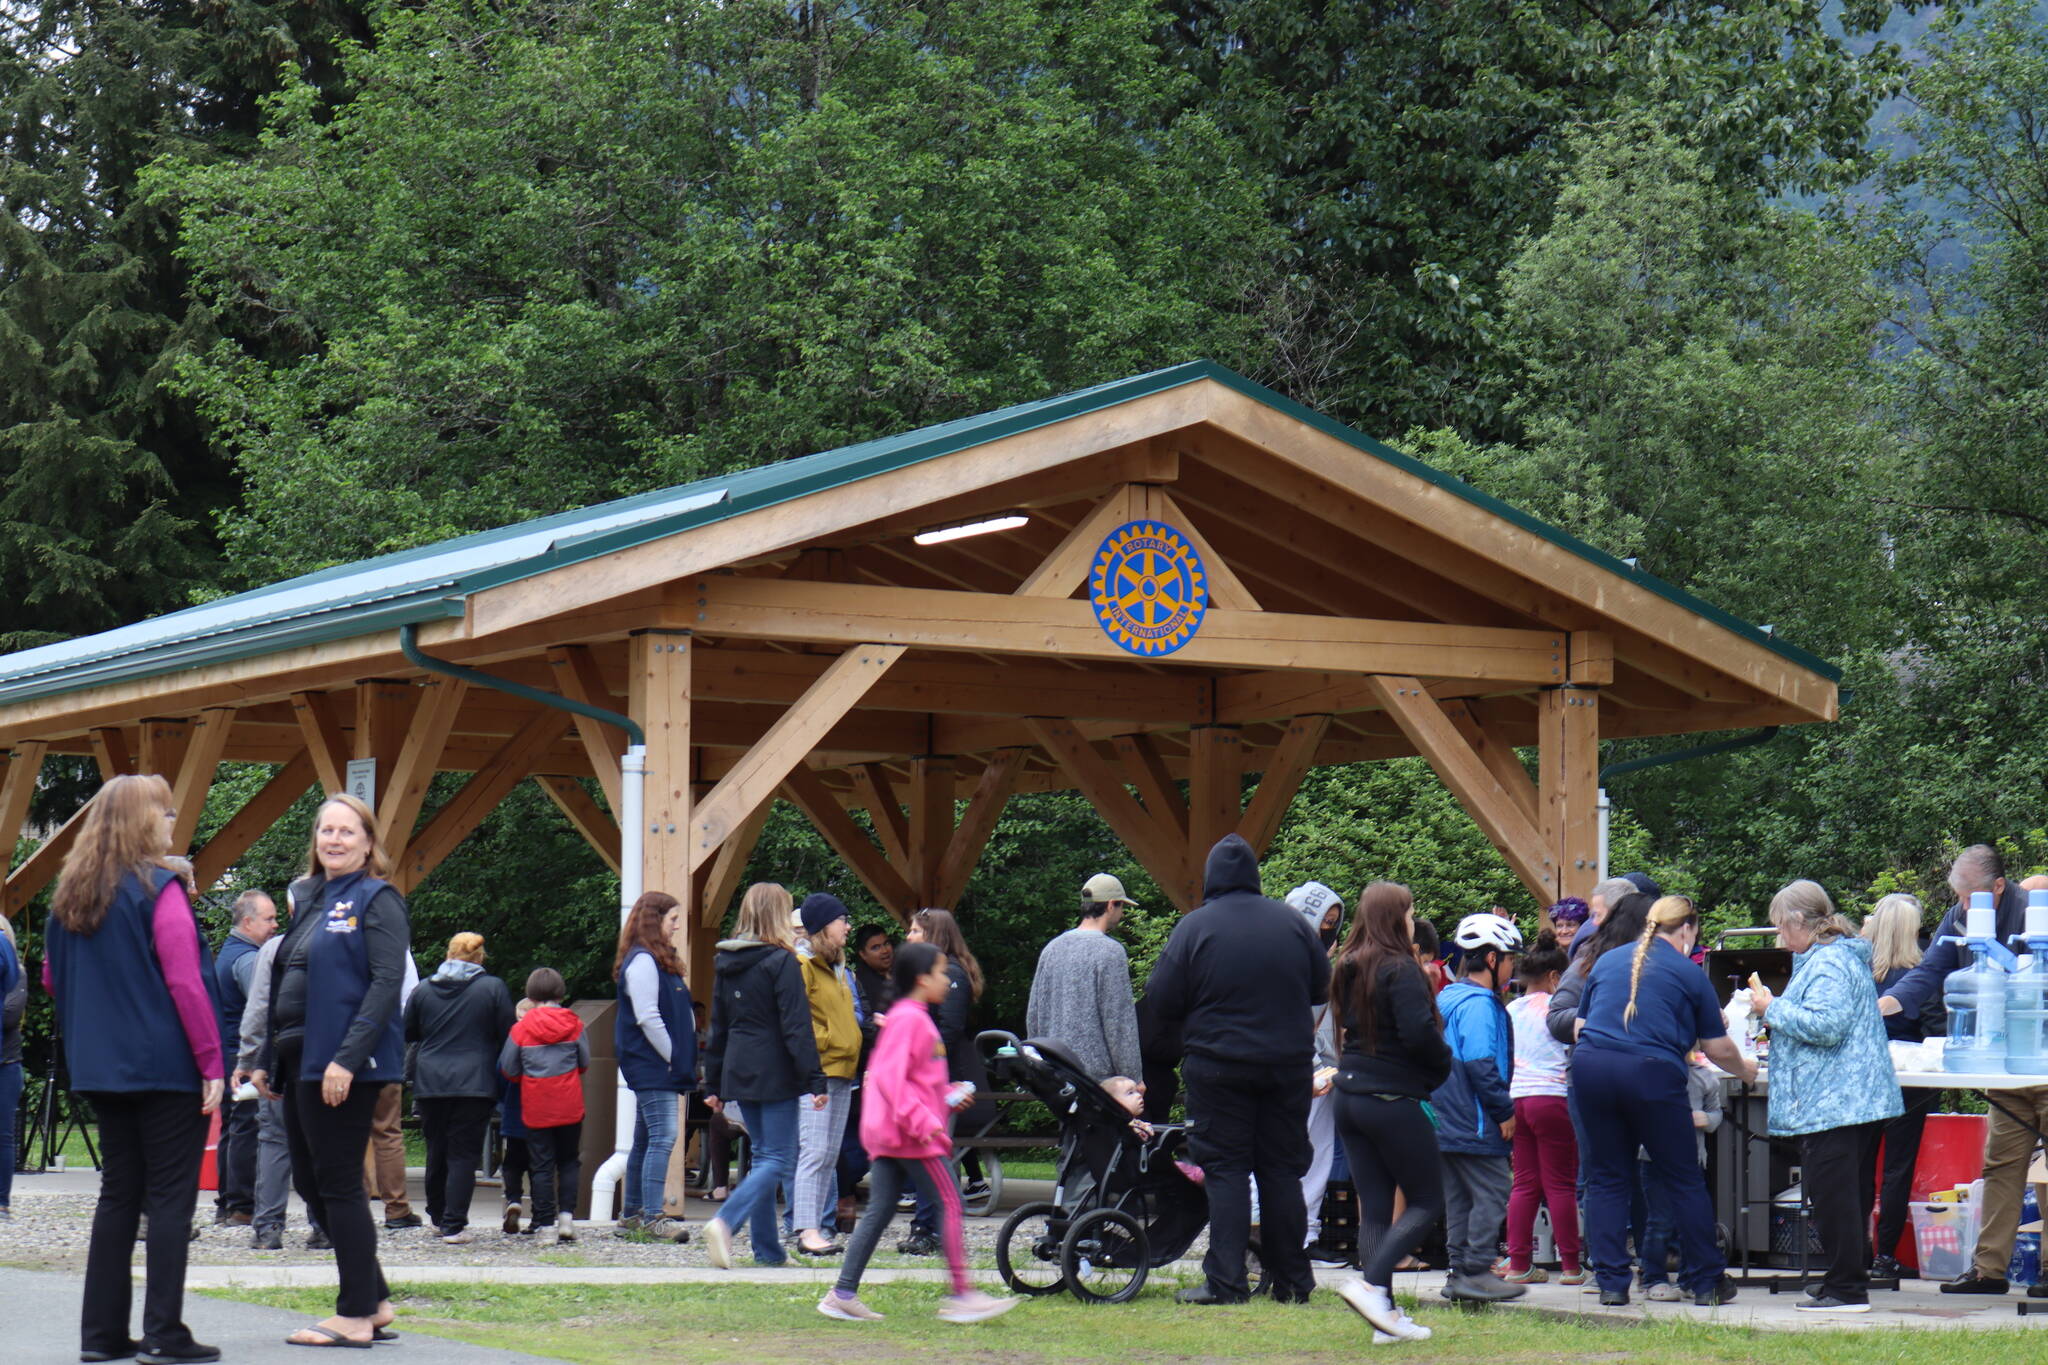 Over 100 people gathered Wednesday evening for the unveiling of a new pavilion at Riverside Rotary Park. (Clarise Larson / Juneau Empire)